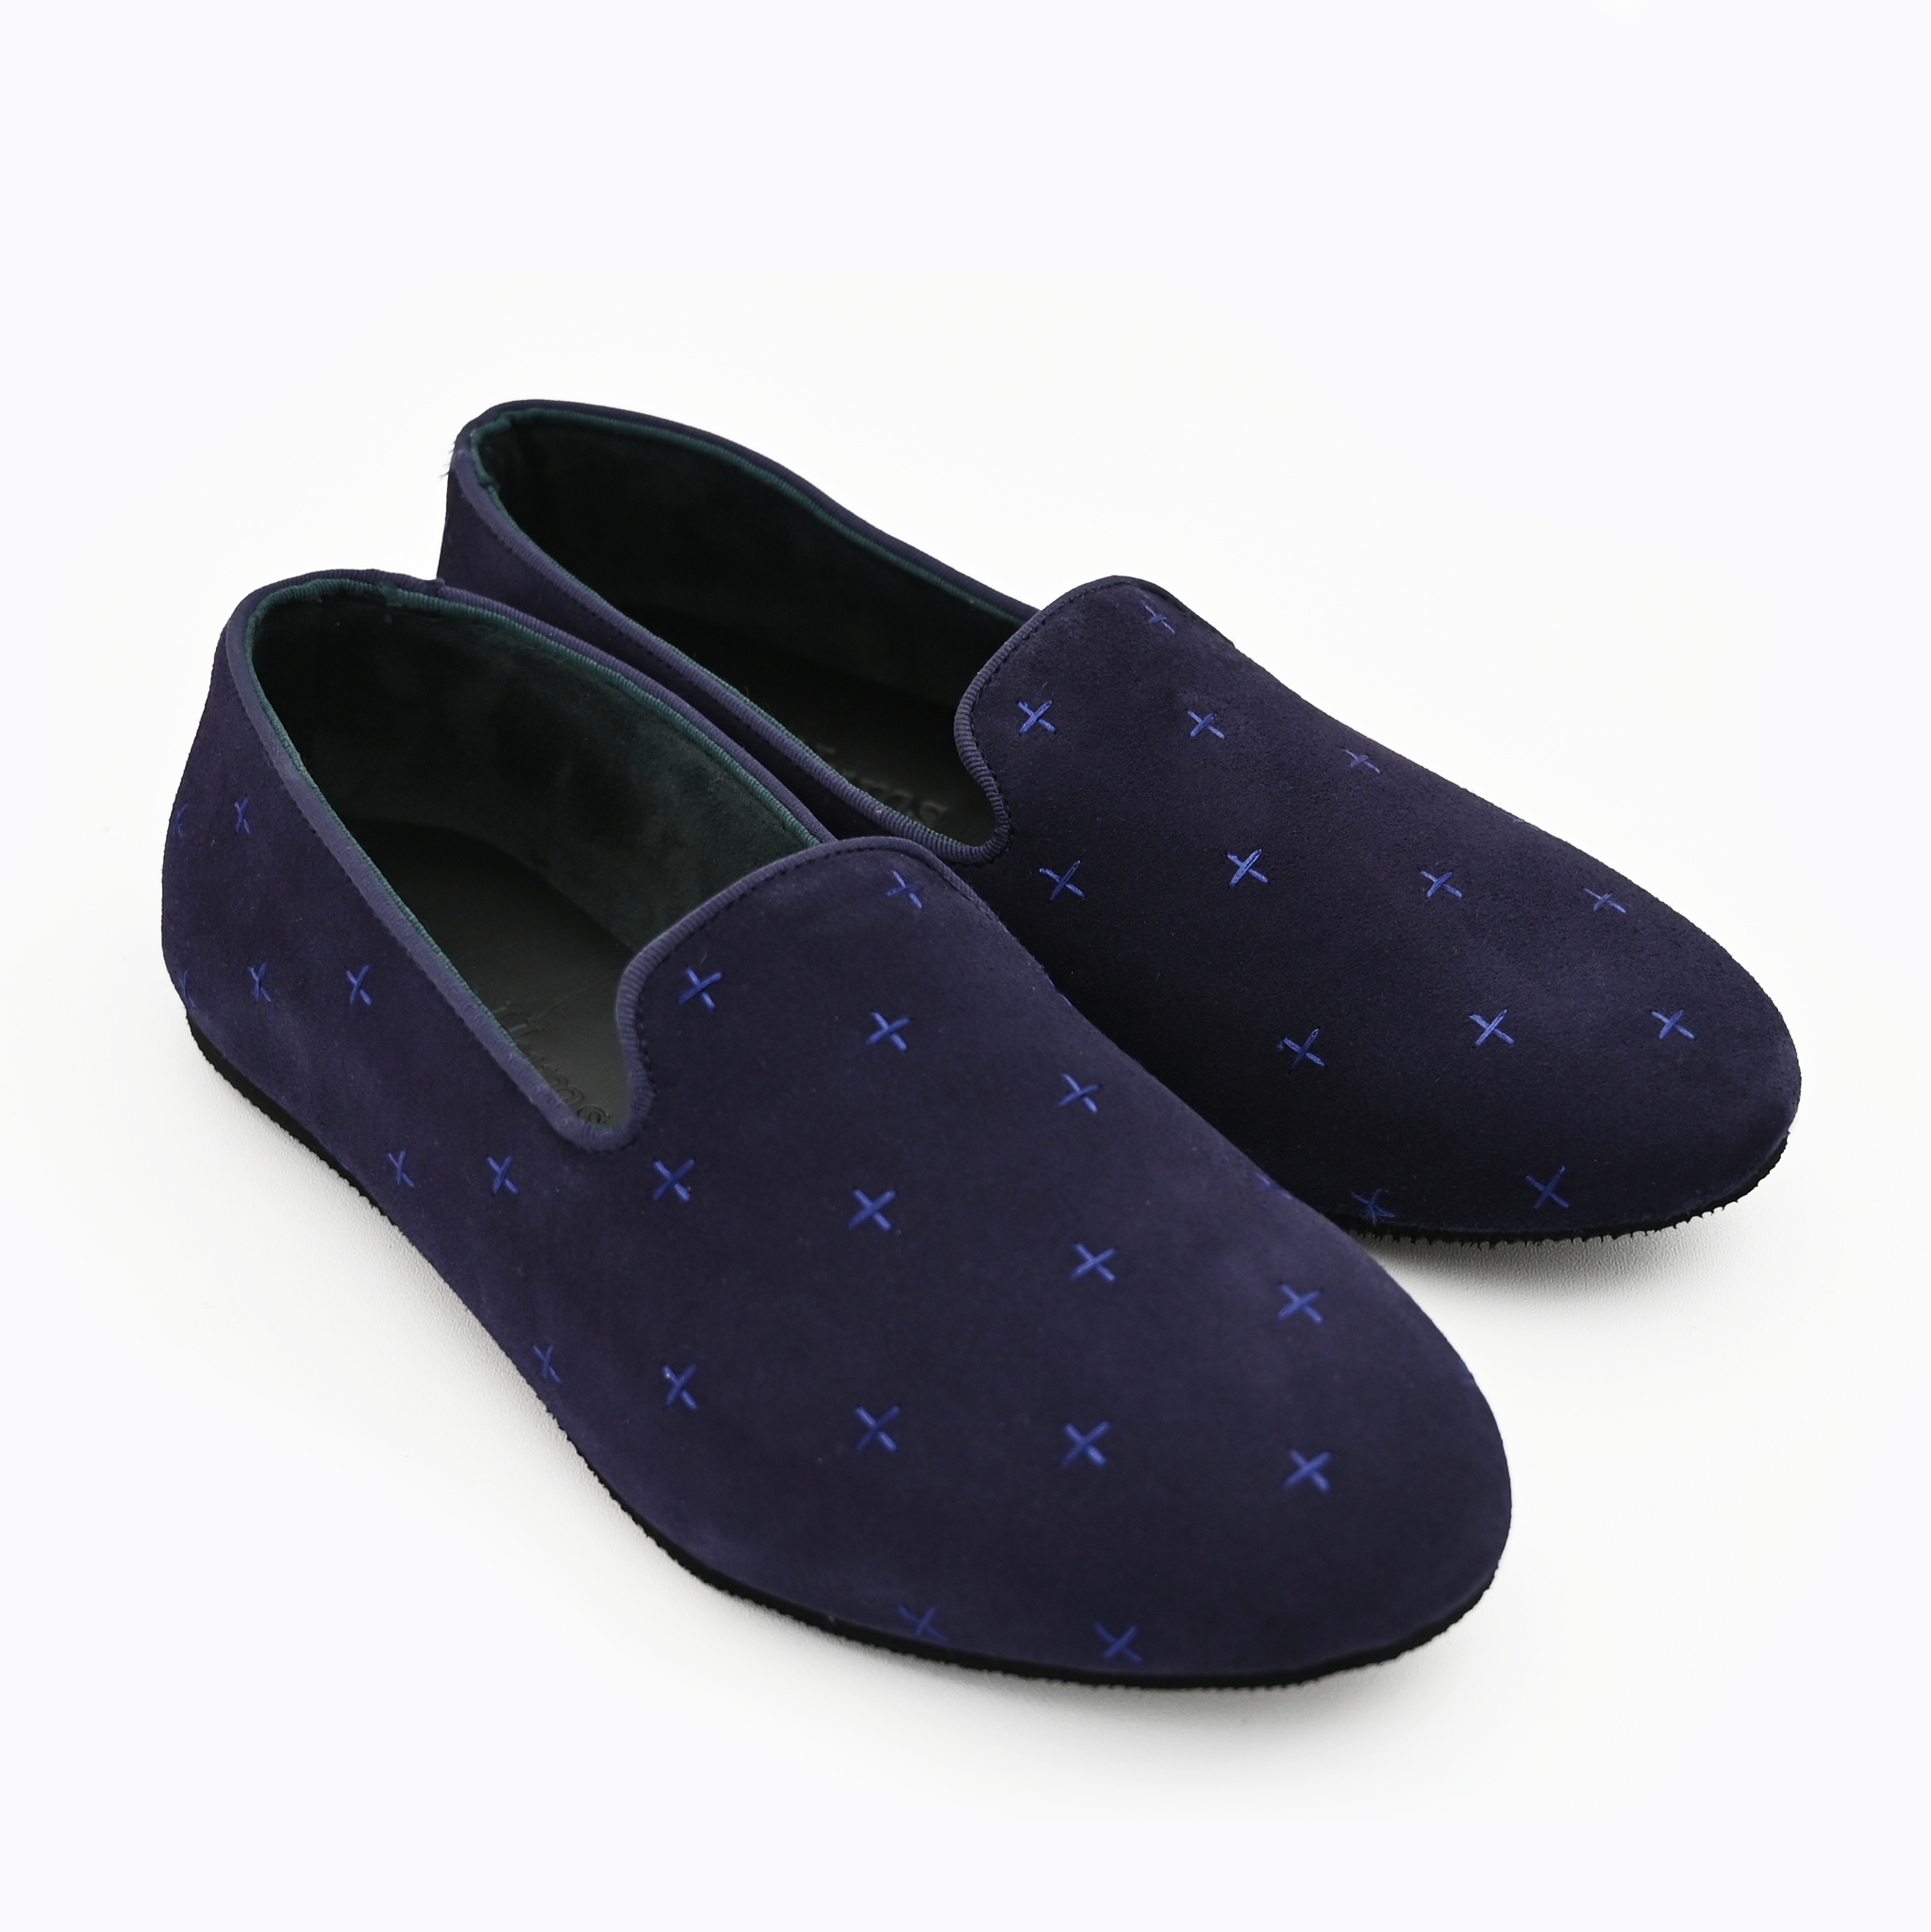 Hums Slippers - Men's Dark Blue Cross Rubber Sole Embroidered Loafers